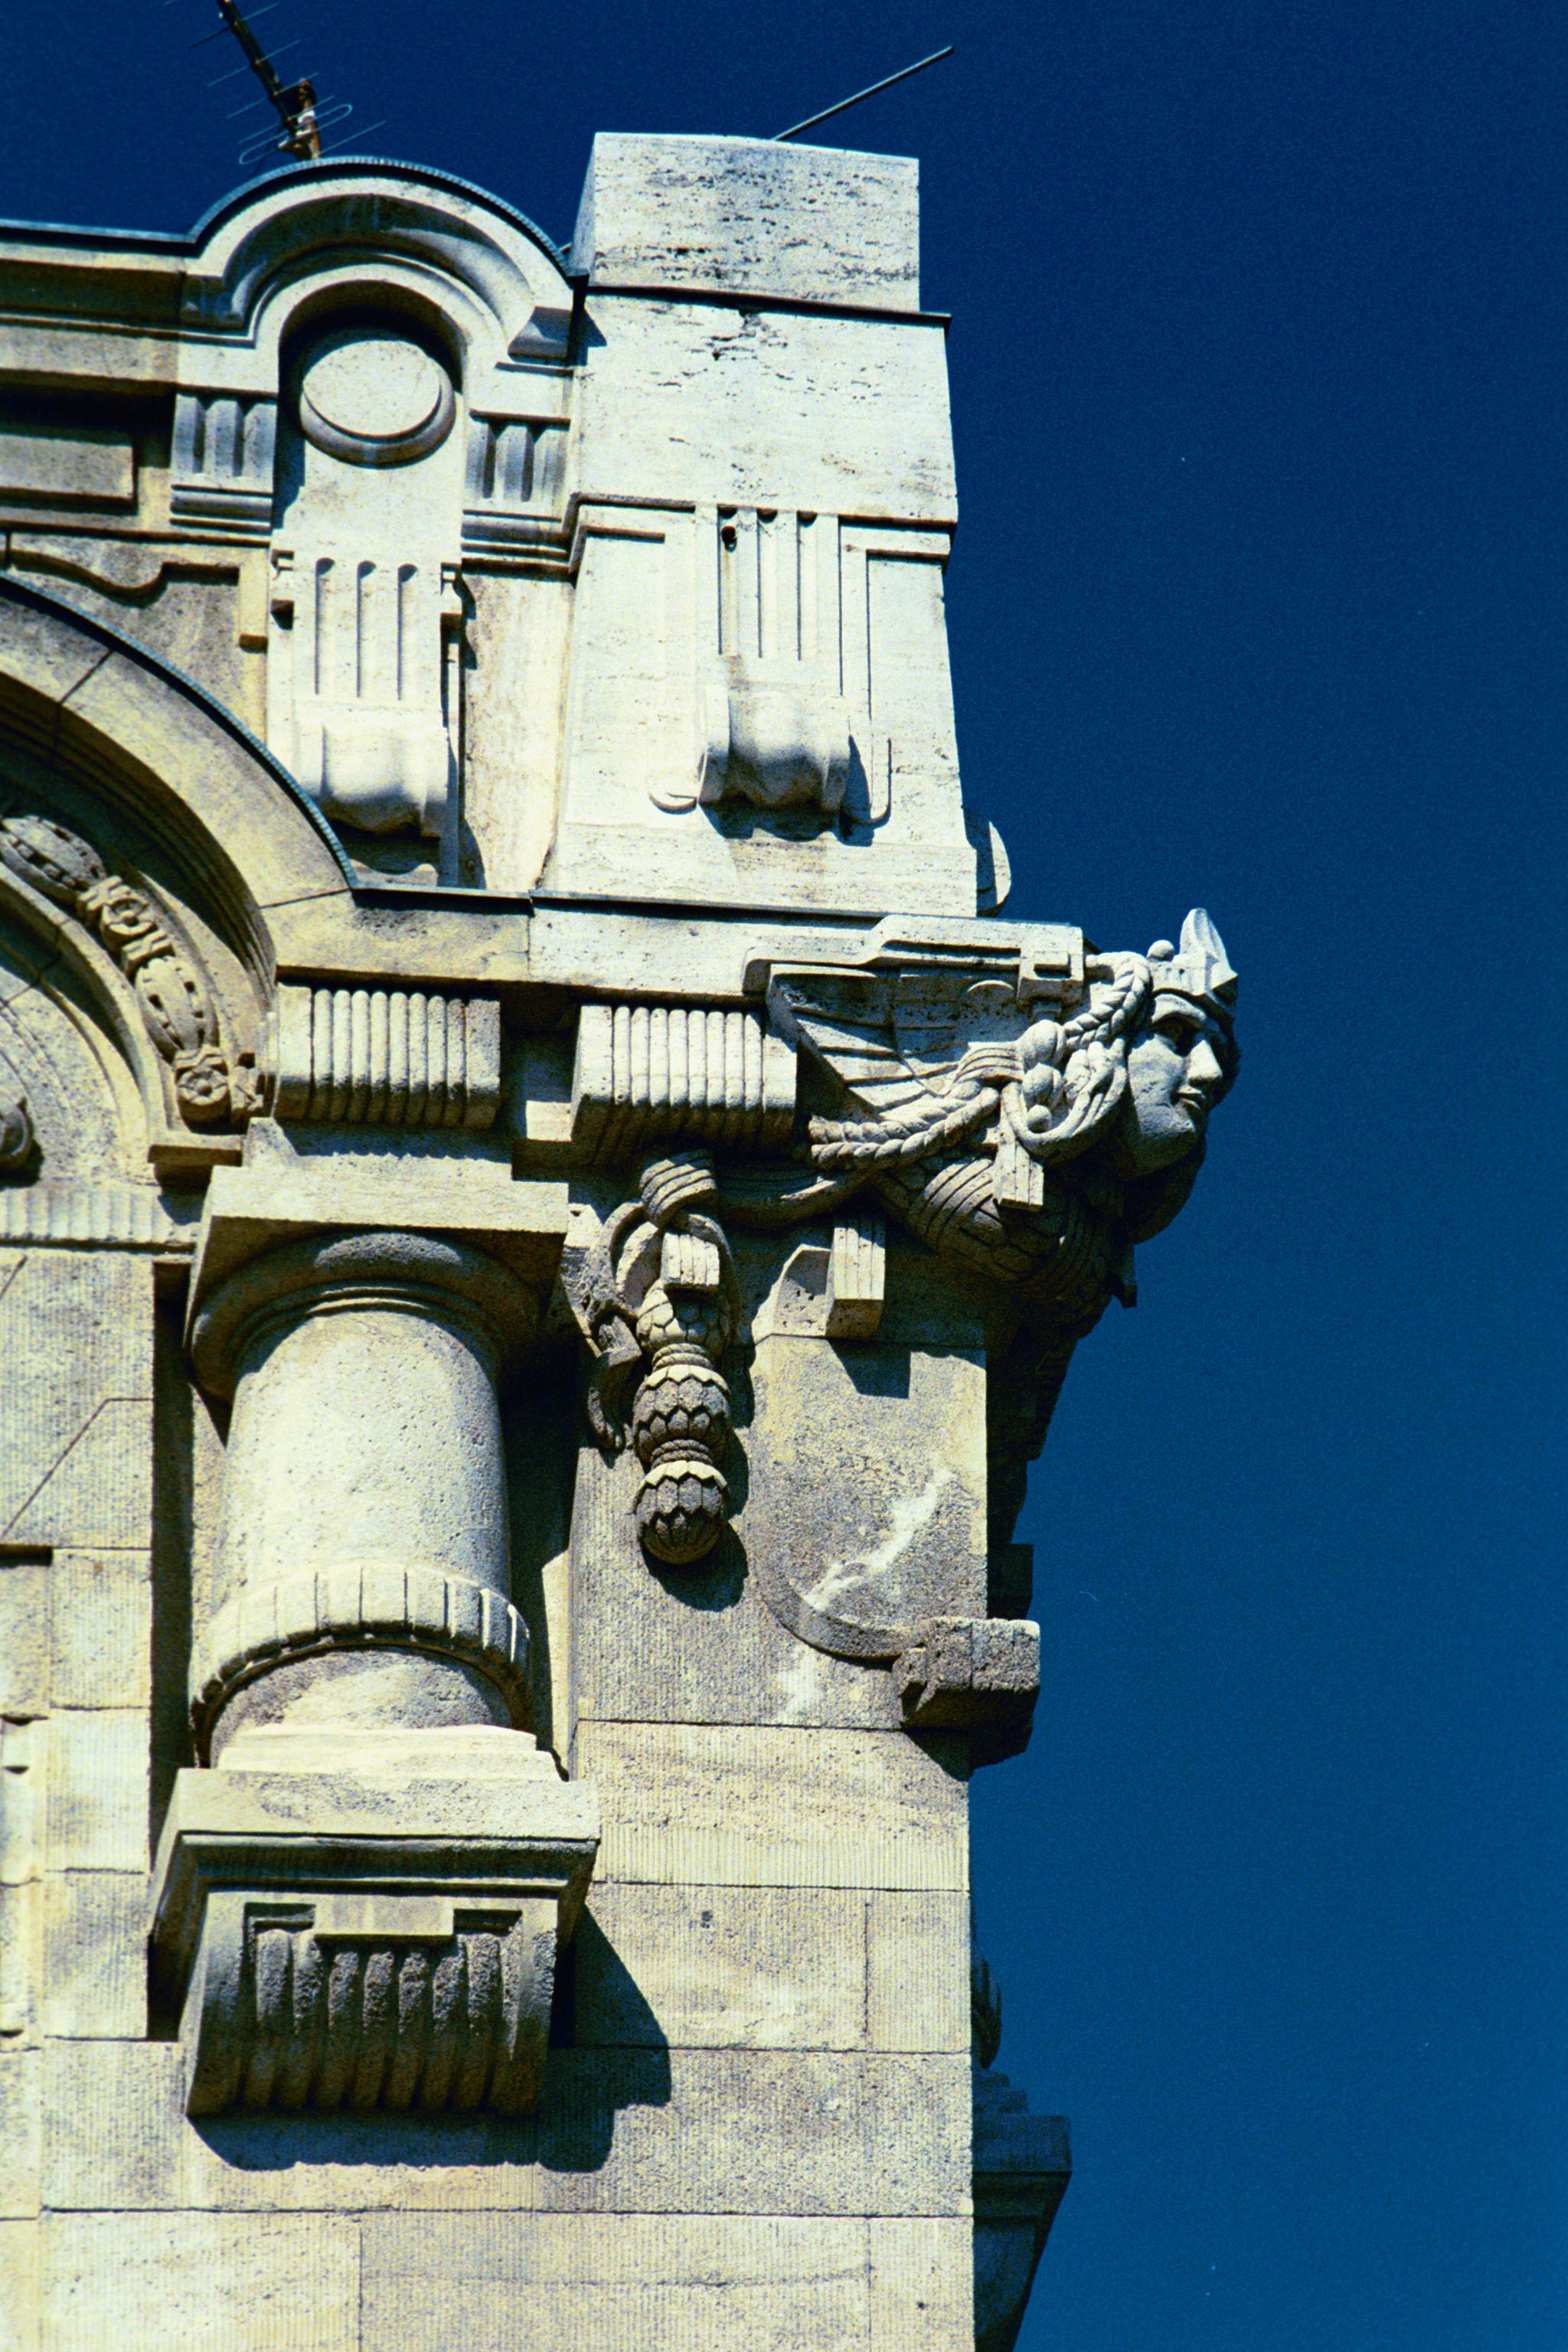 Sculpture on the building photo